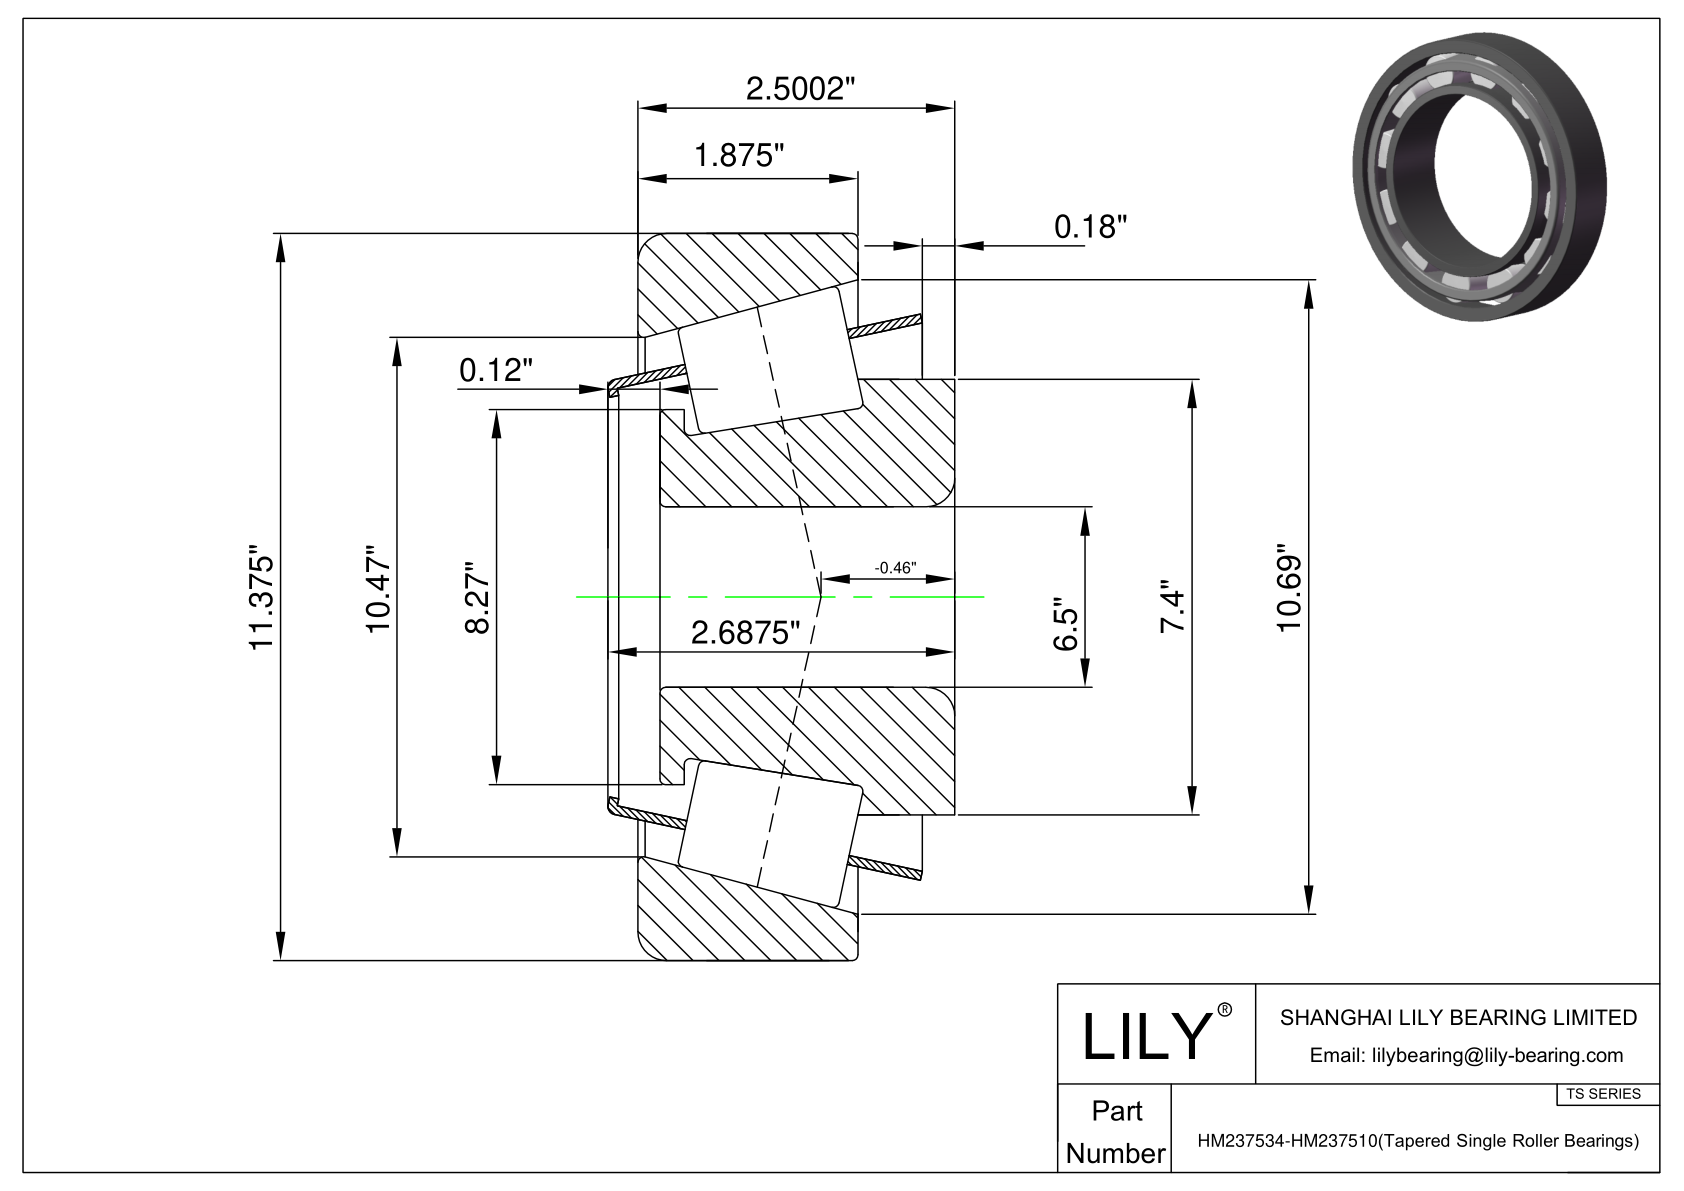 HM237534-HM237510 TS (Tapered Single Roller Bearings) (Imperial) cad drawing